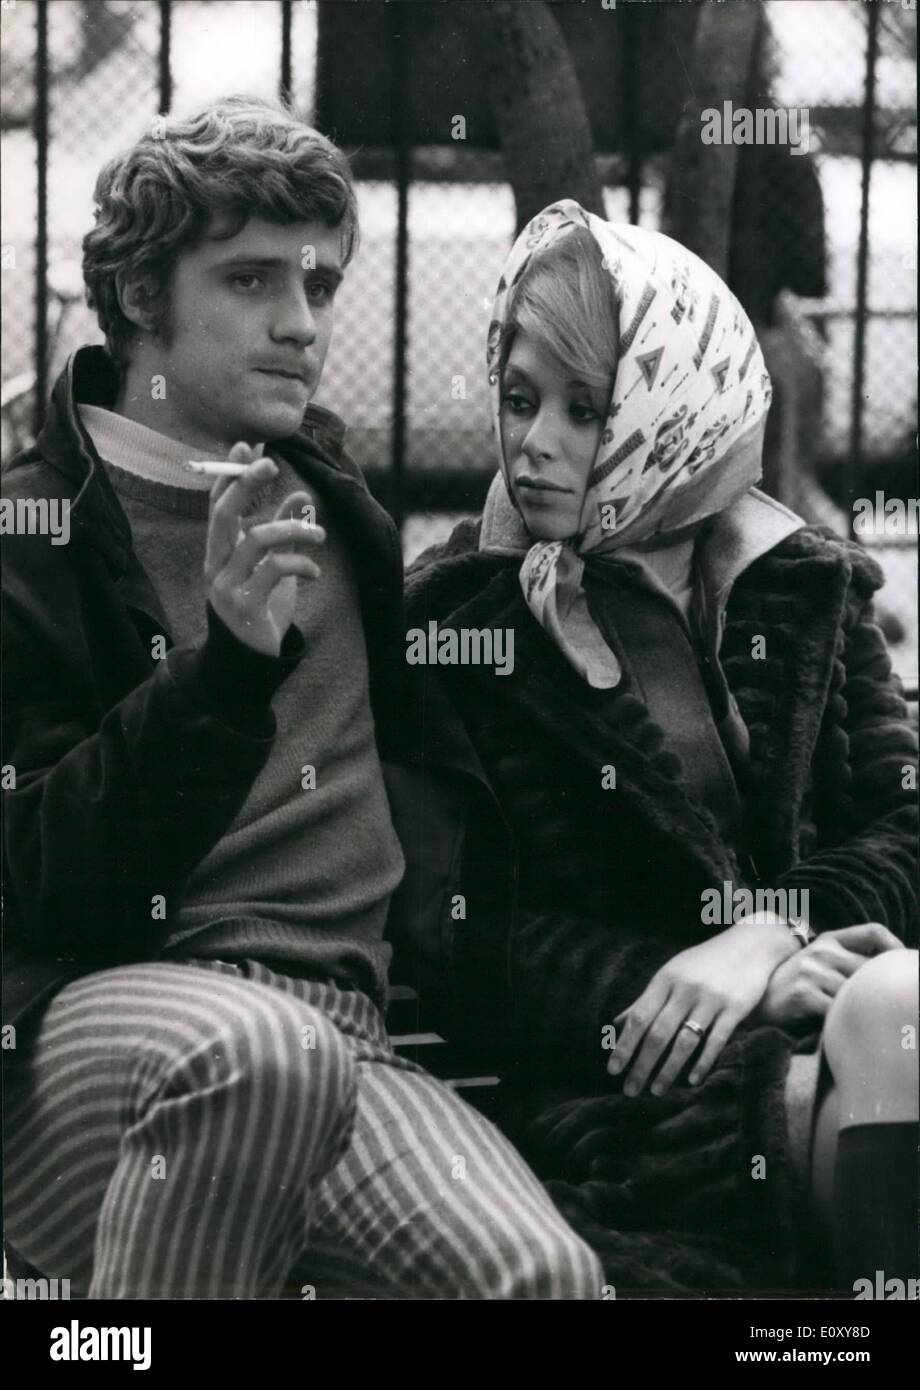 Apr. 04, 1968 - Mireille Darc Costar with Italian actor Carlo Di Meo in ''Summit'': Mireille Darc, the famous French actress,co-star with a young Italian actor Carlo Di Meo in'' summit'', a film now in the making in Paris.Young Carlo is the son of the well-known Italian actress Alida Vali. Photo shows Mireille Darc pictured with Carlo Di Meo in a scene of the film Stock Photo